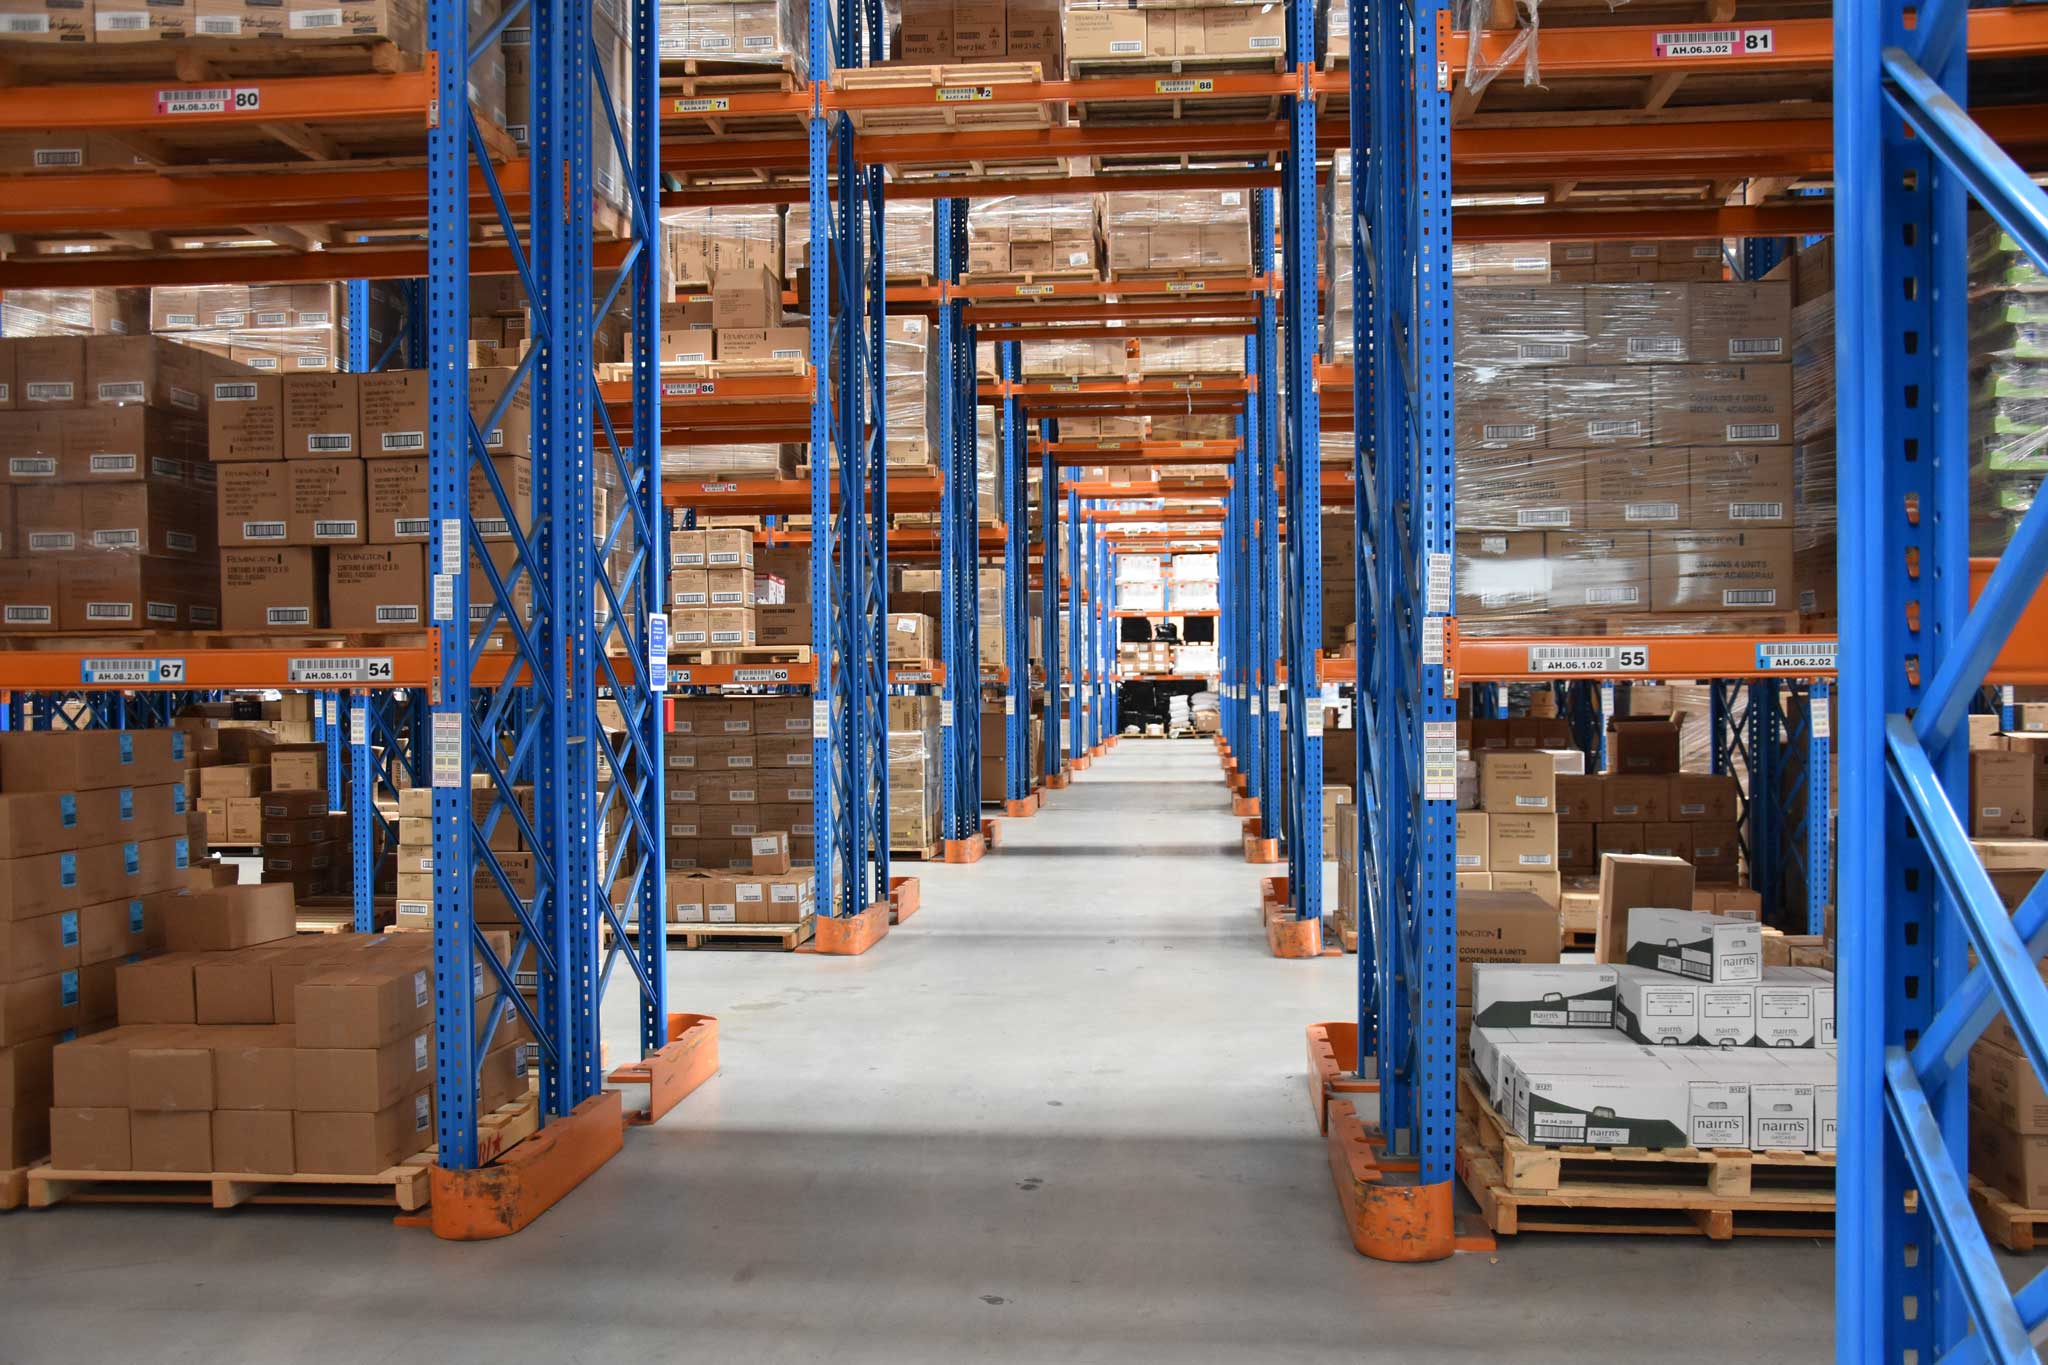 What to Consider When Choosing a Warehouse Storage Provider